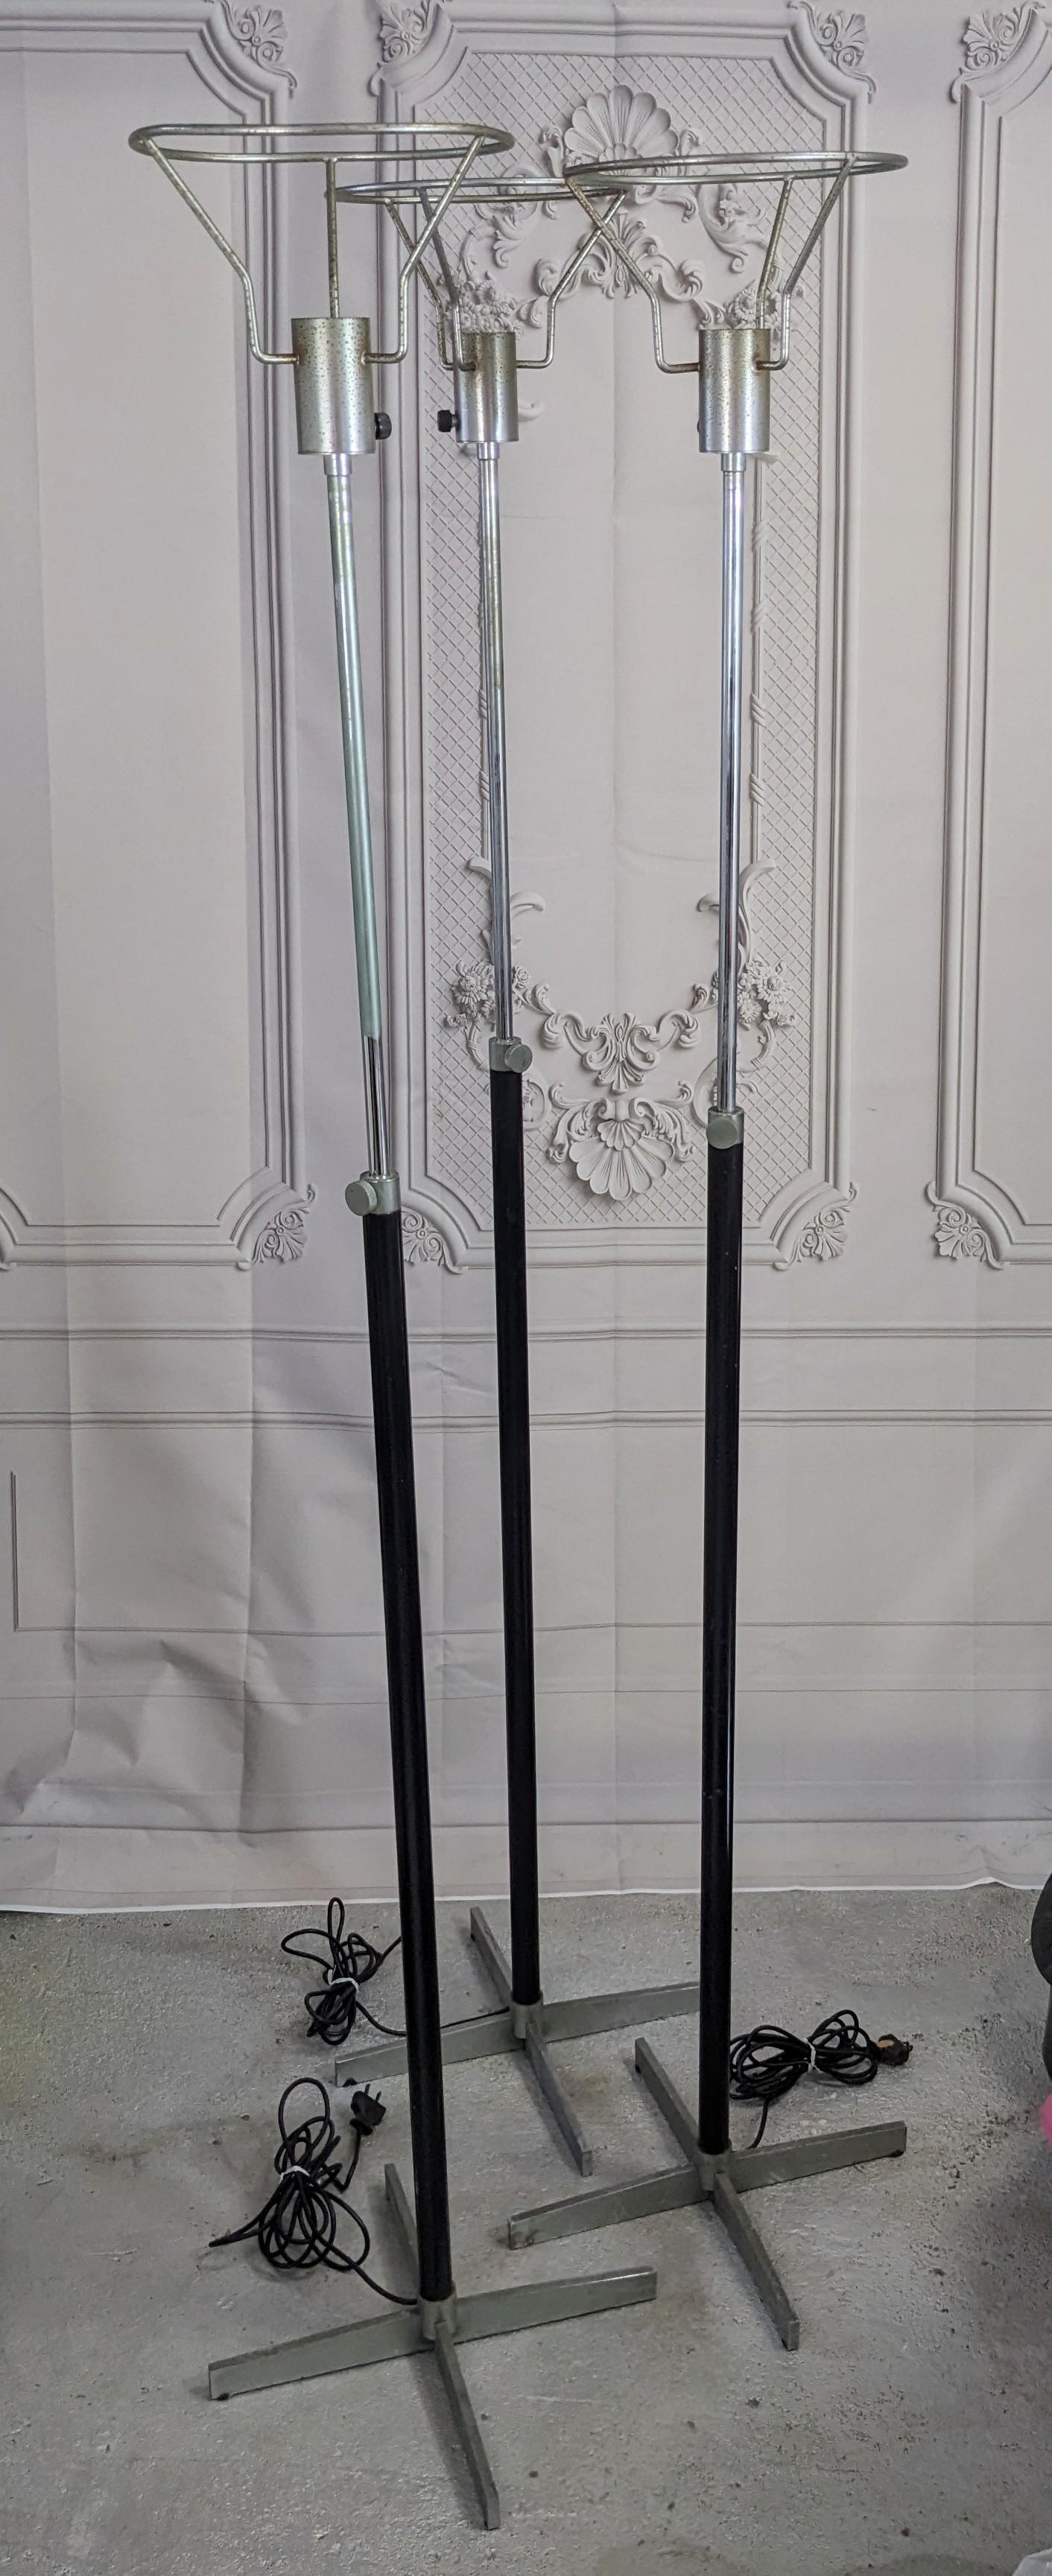 Unusual Trio of Art Deco Adjustable Floor Lamps with black enameled metal shafts and silvered metal. They extend to different heights for interesting options. 1930's USA.  Black enamel metal shafts 1.25